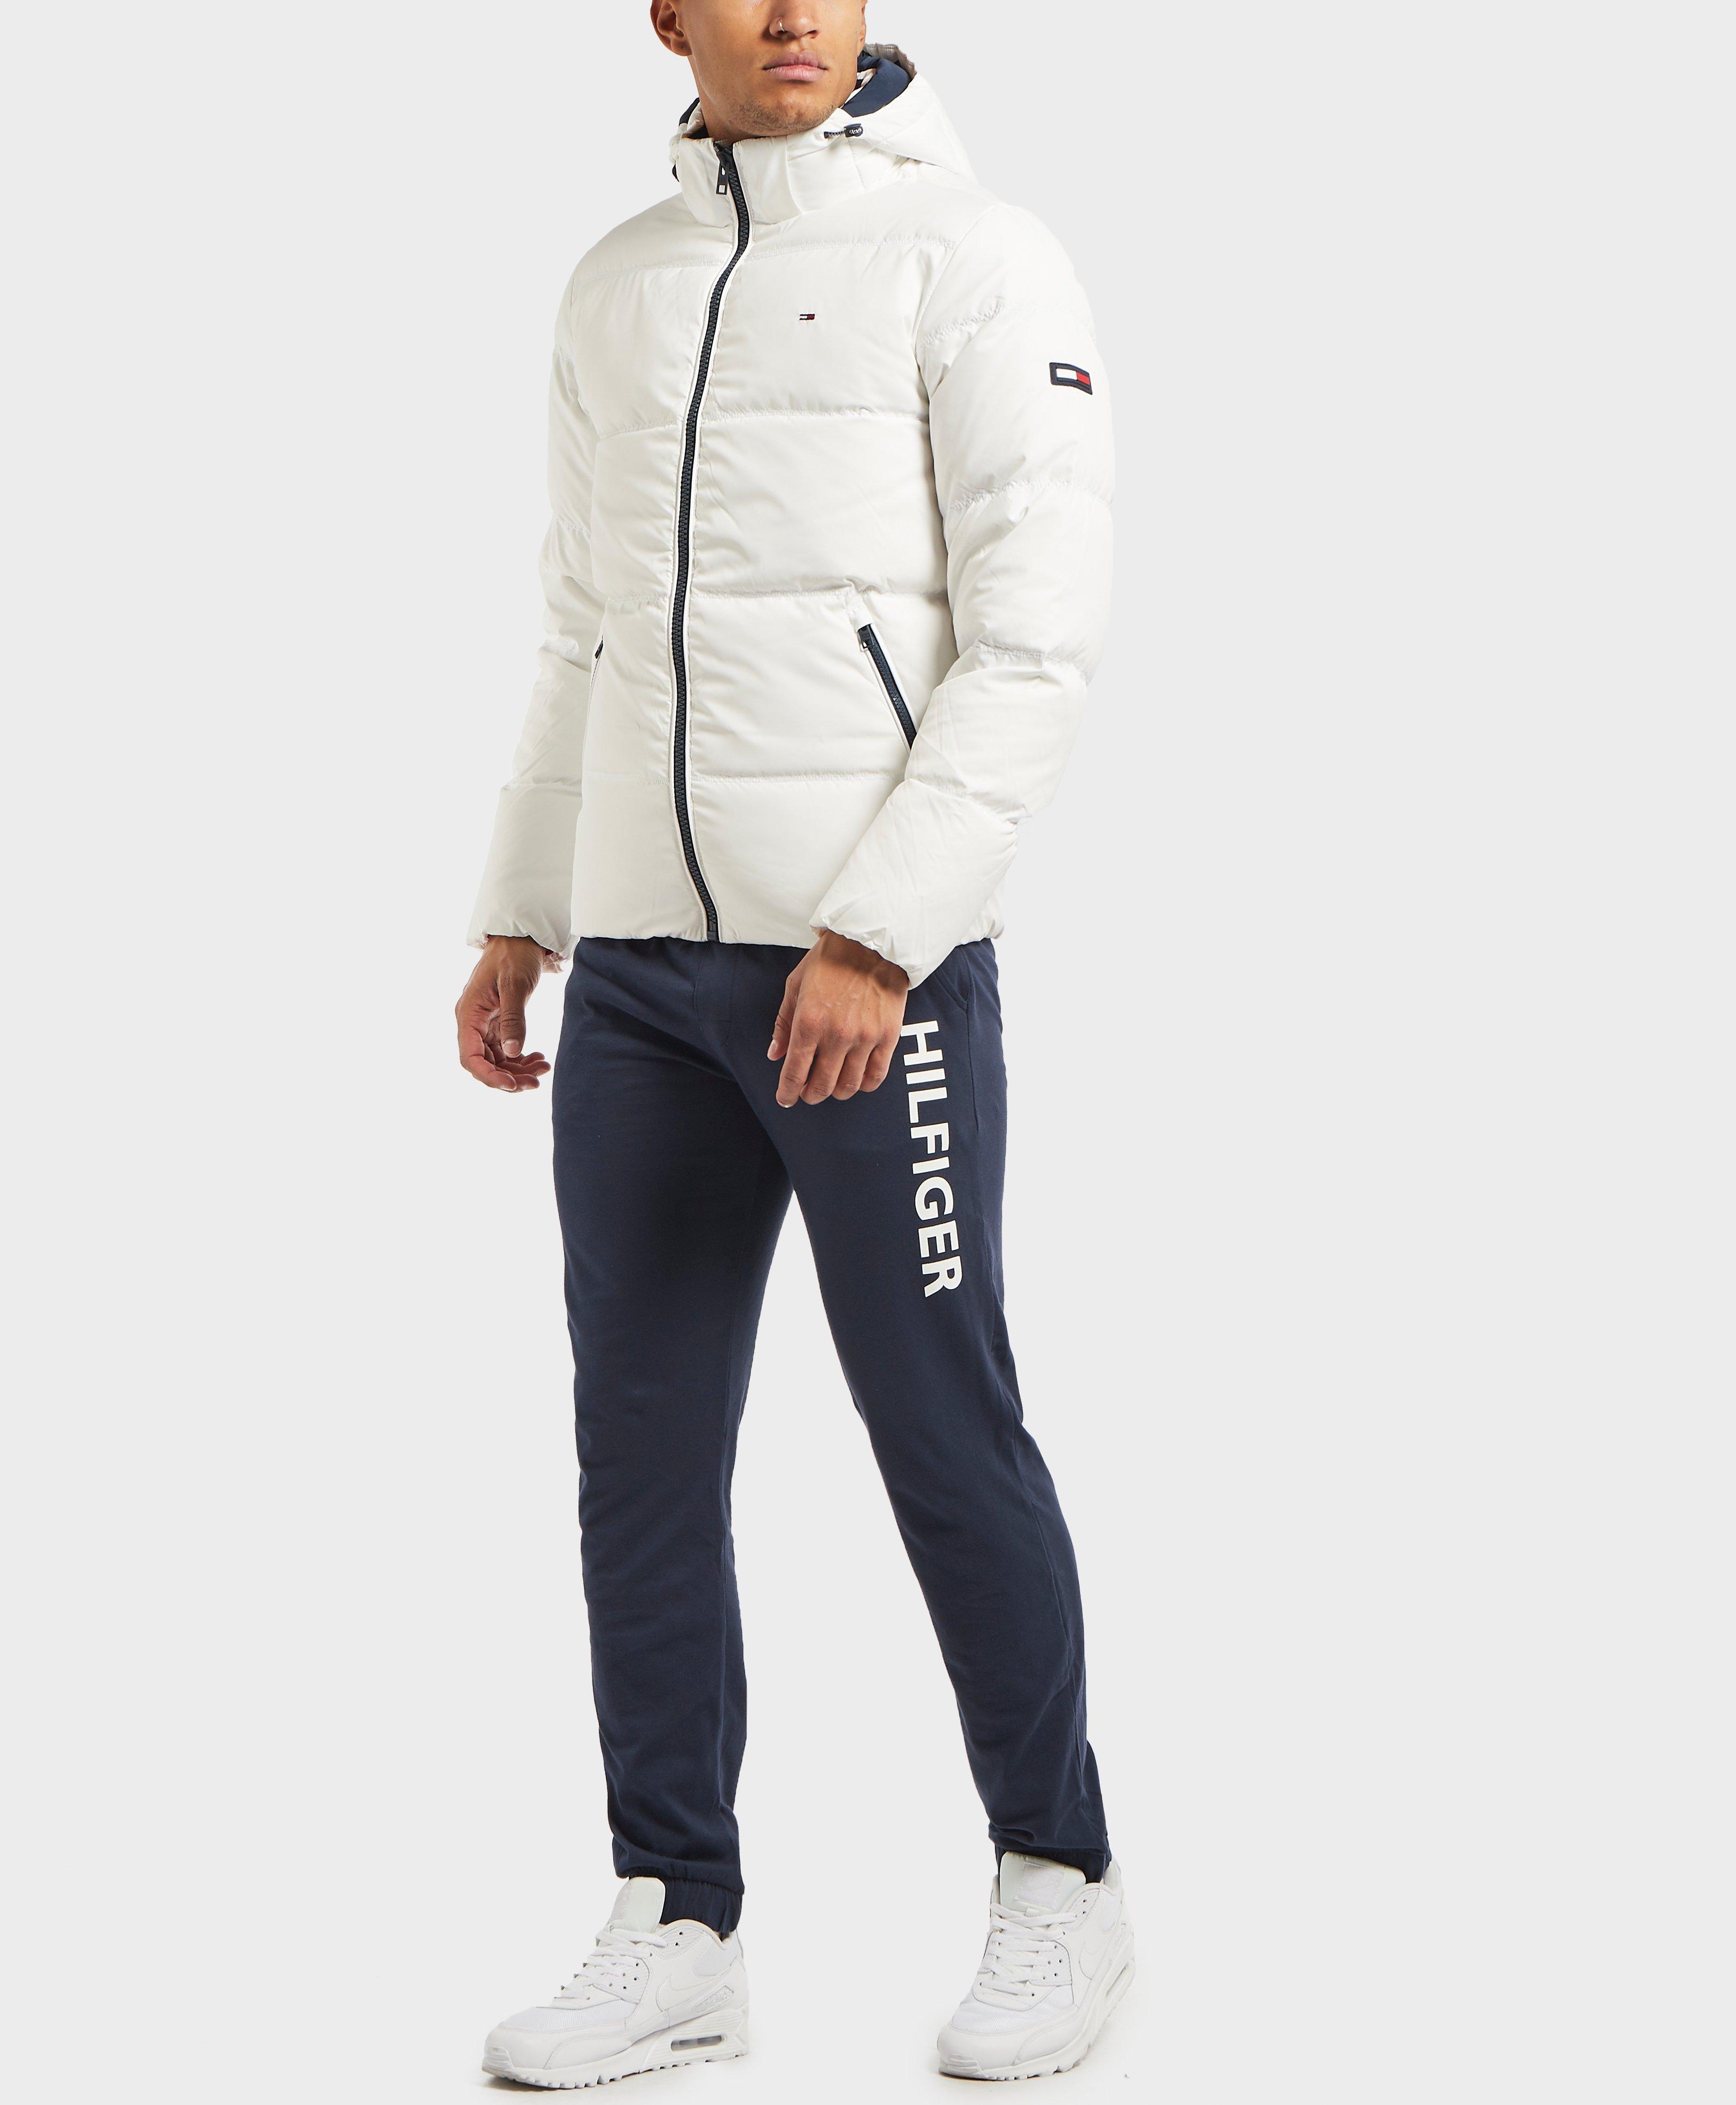 Tommy Hilfiger Essential Down Padded Jacket in White for Men - Lyst